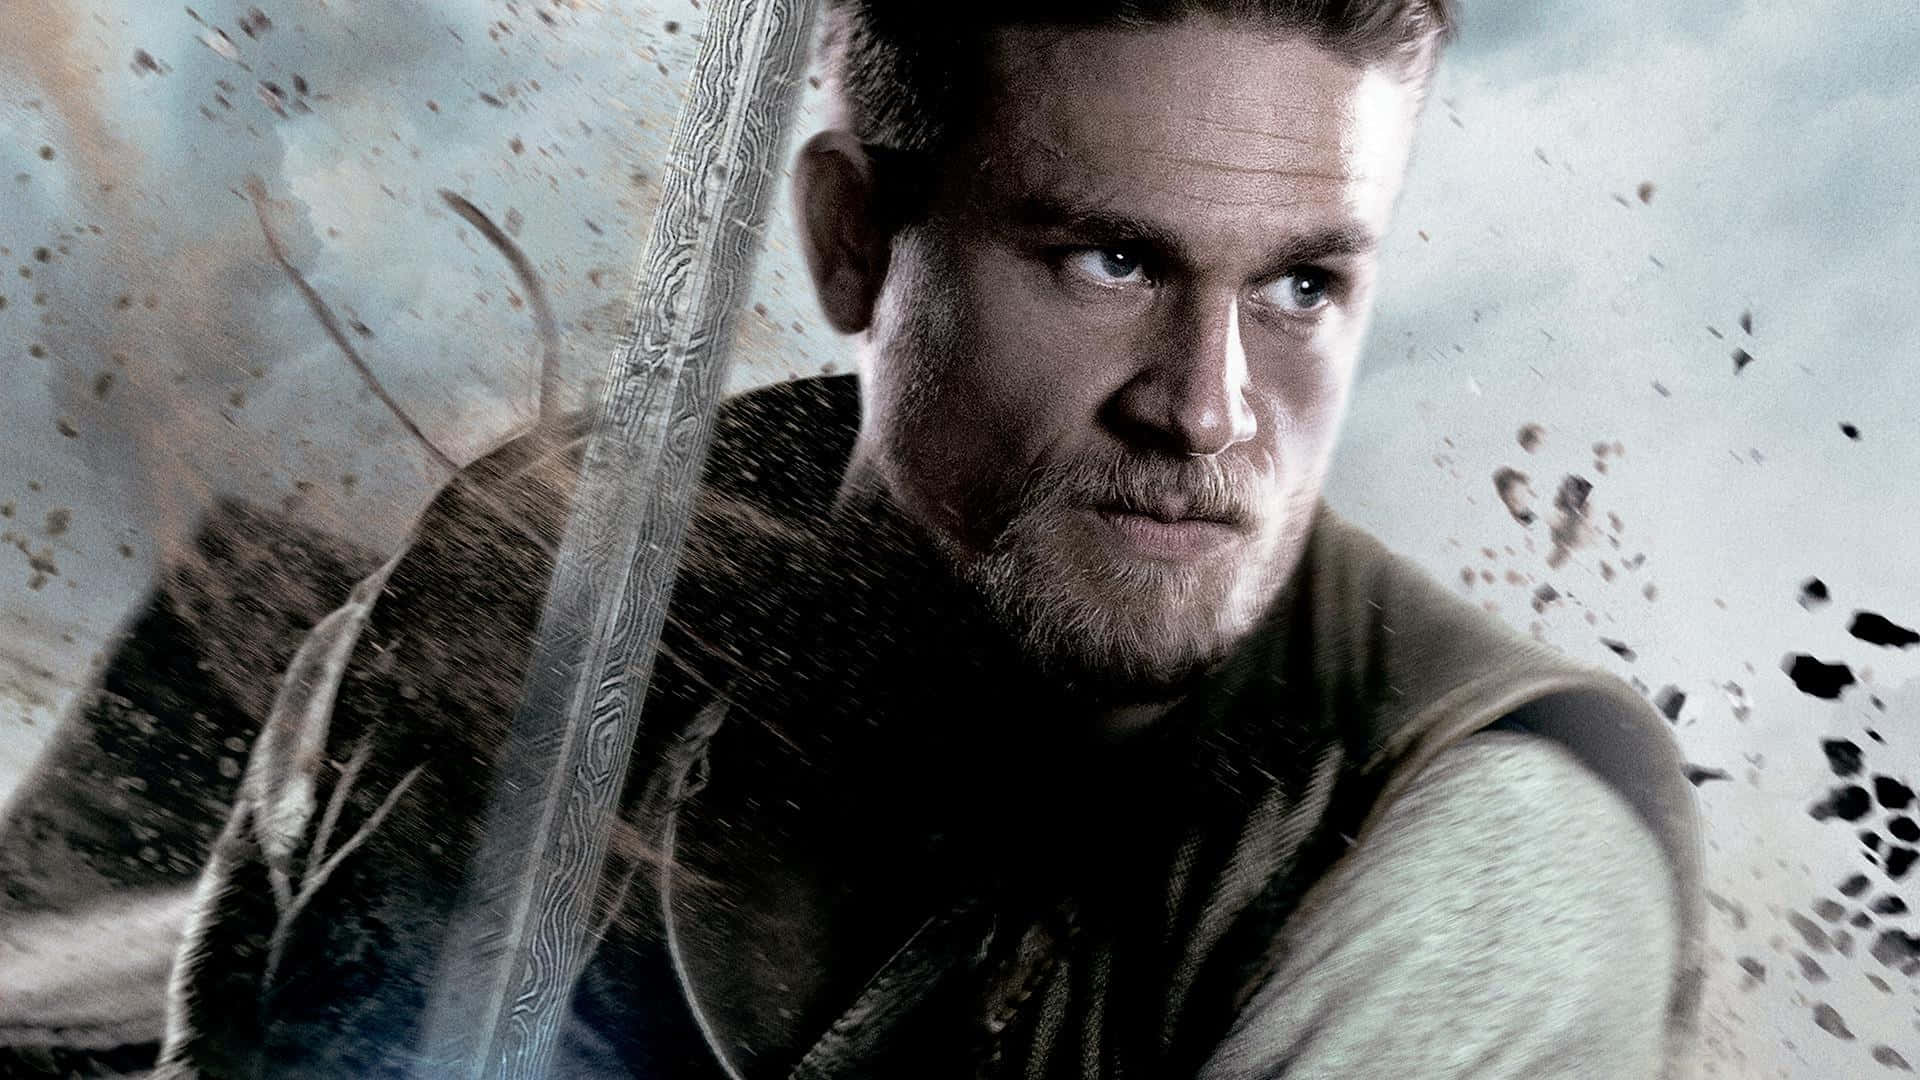 A Man Holding A Sword In A Movie Poster